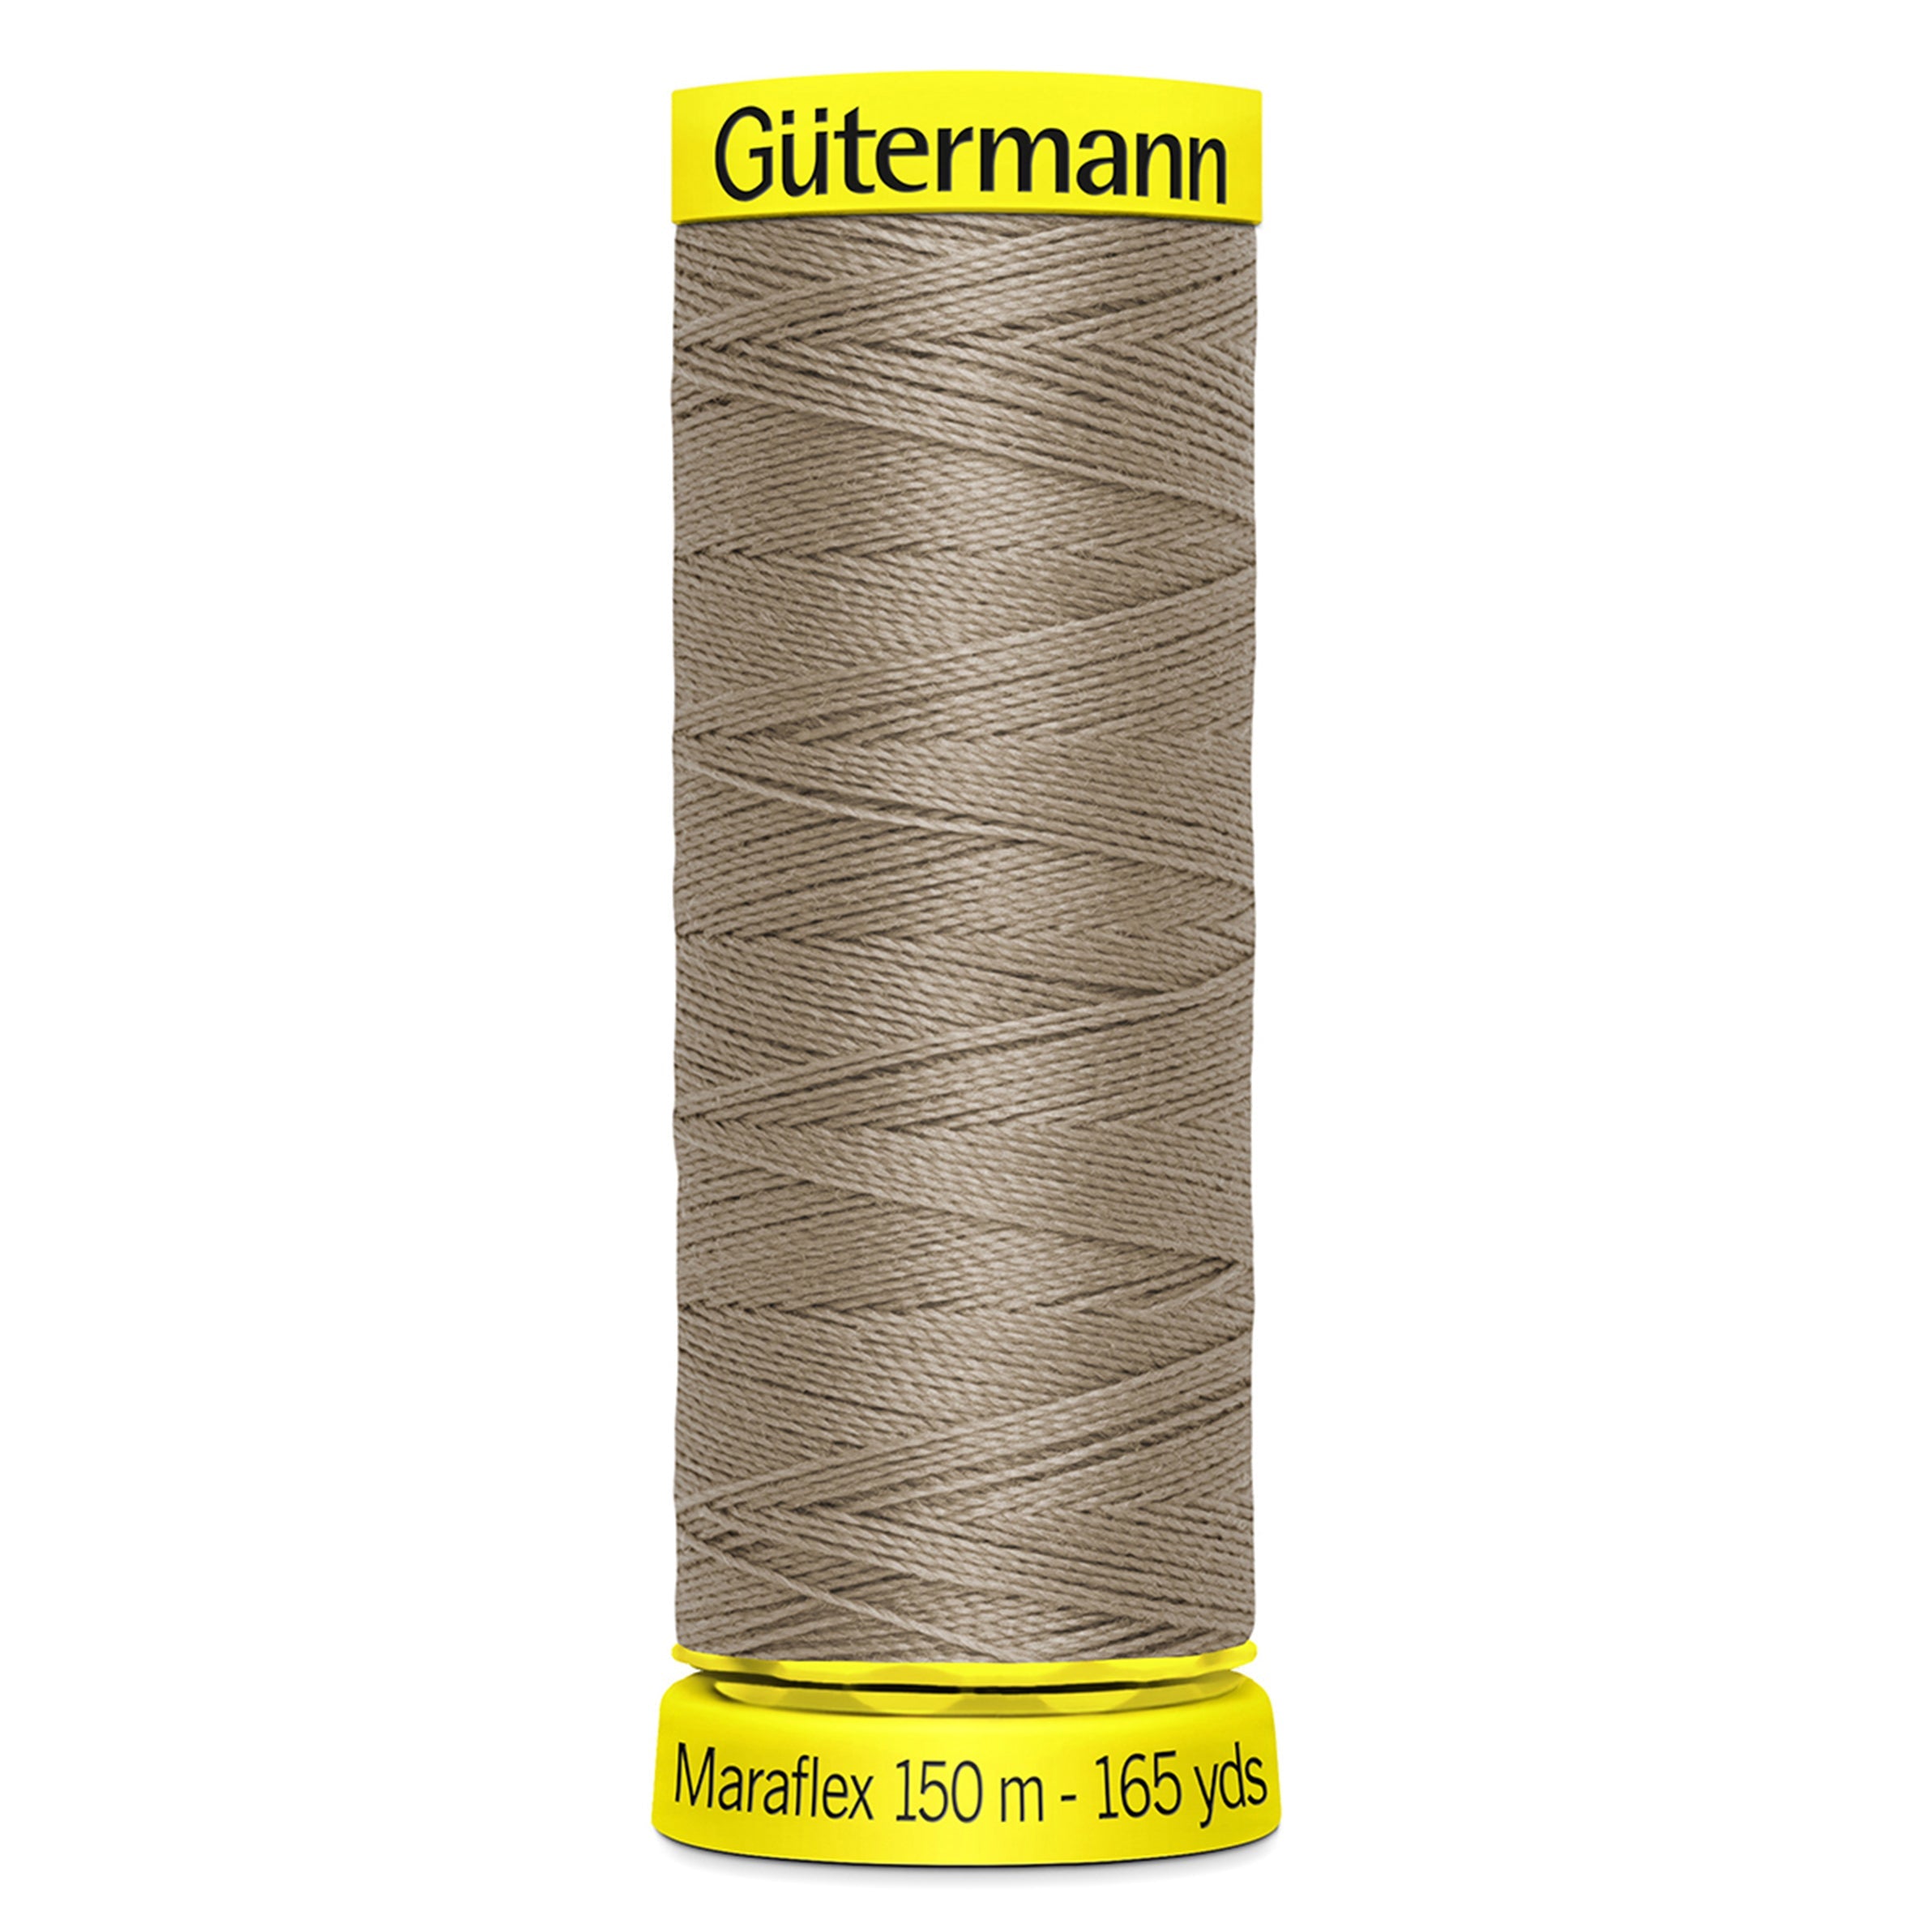 Gutermann Maraflex Stretchy Sewing Thread 150m colour 199 from Jaycotts Sewing Supplies